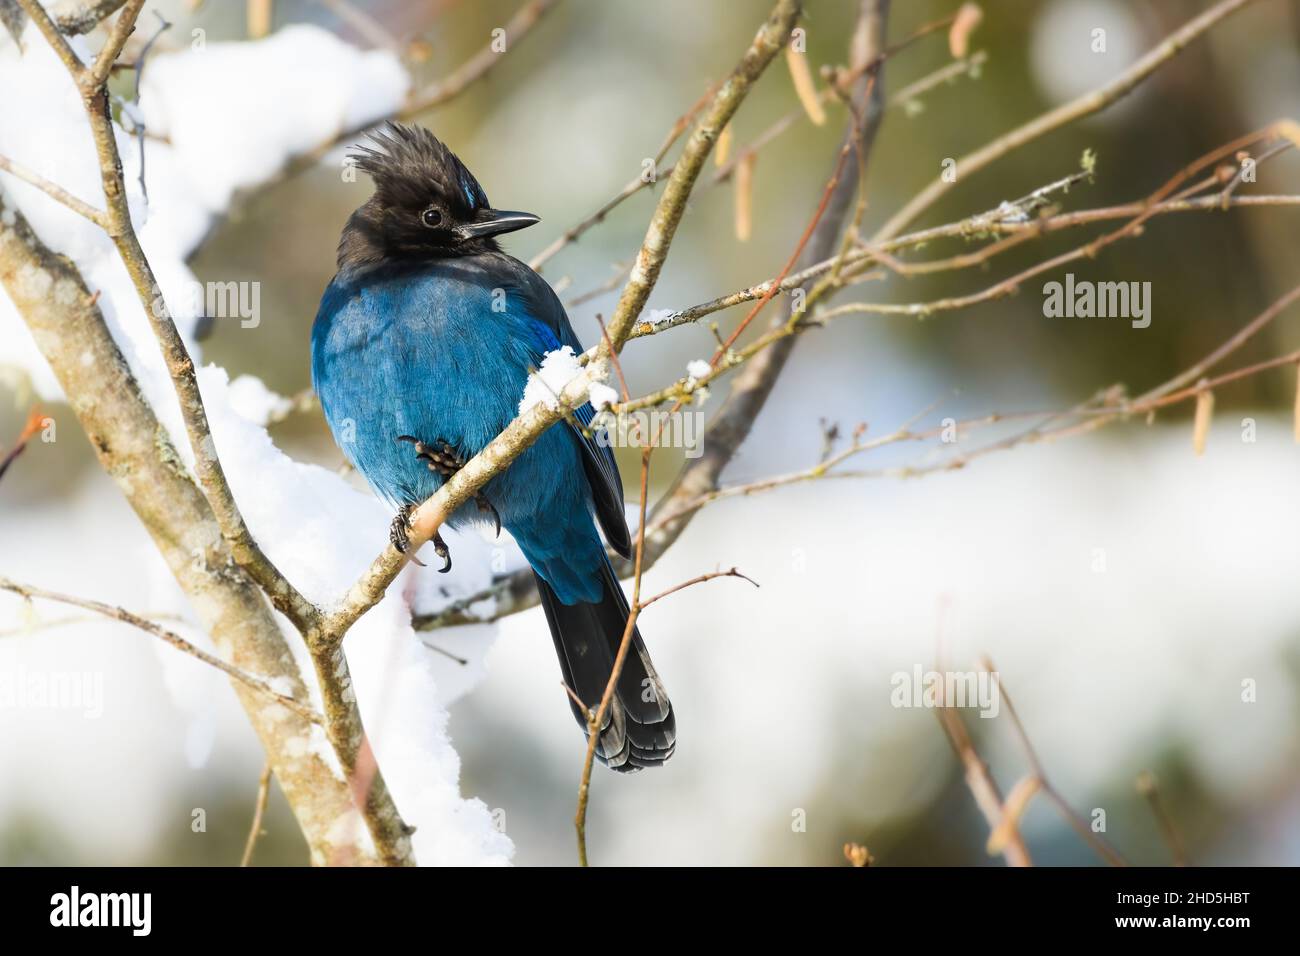 Steller's Jay in King County Washington State in a tree in winter with patches of snow on the branches glows with blue feathers Stock Photo